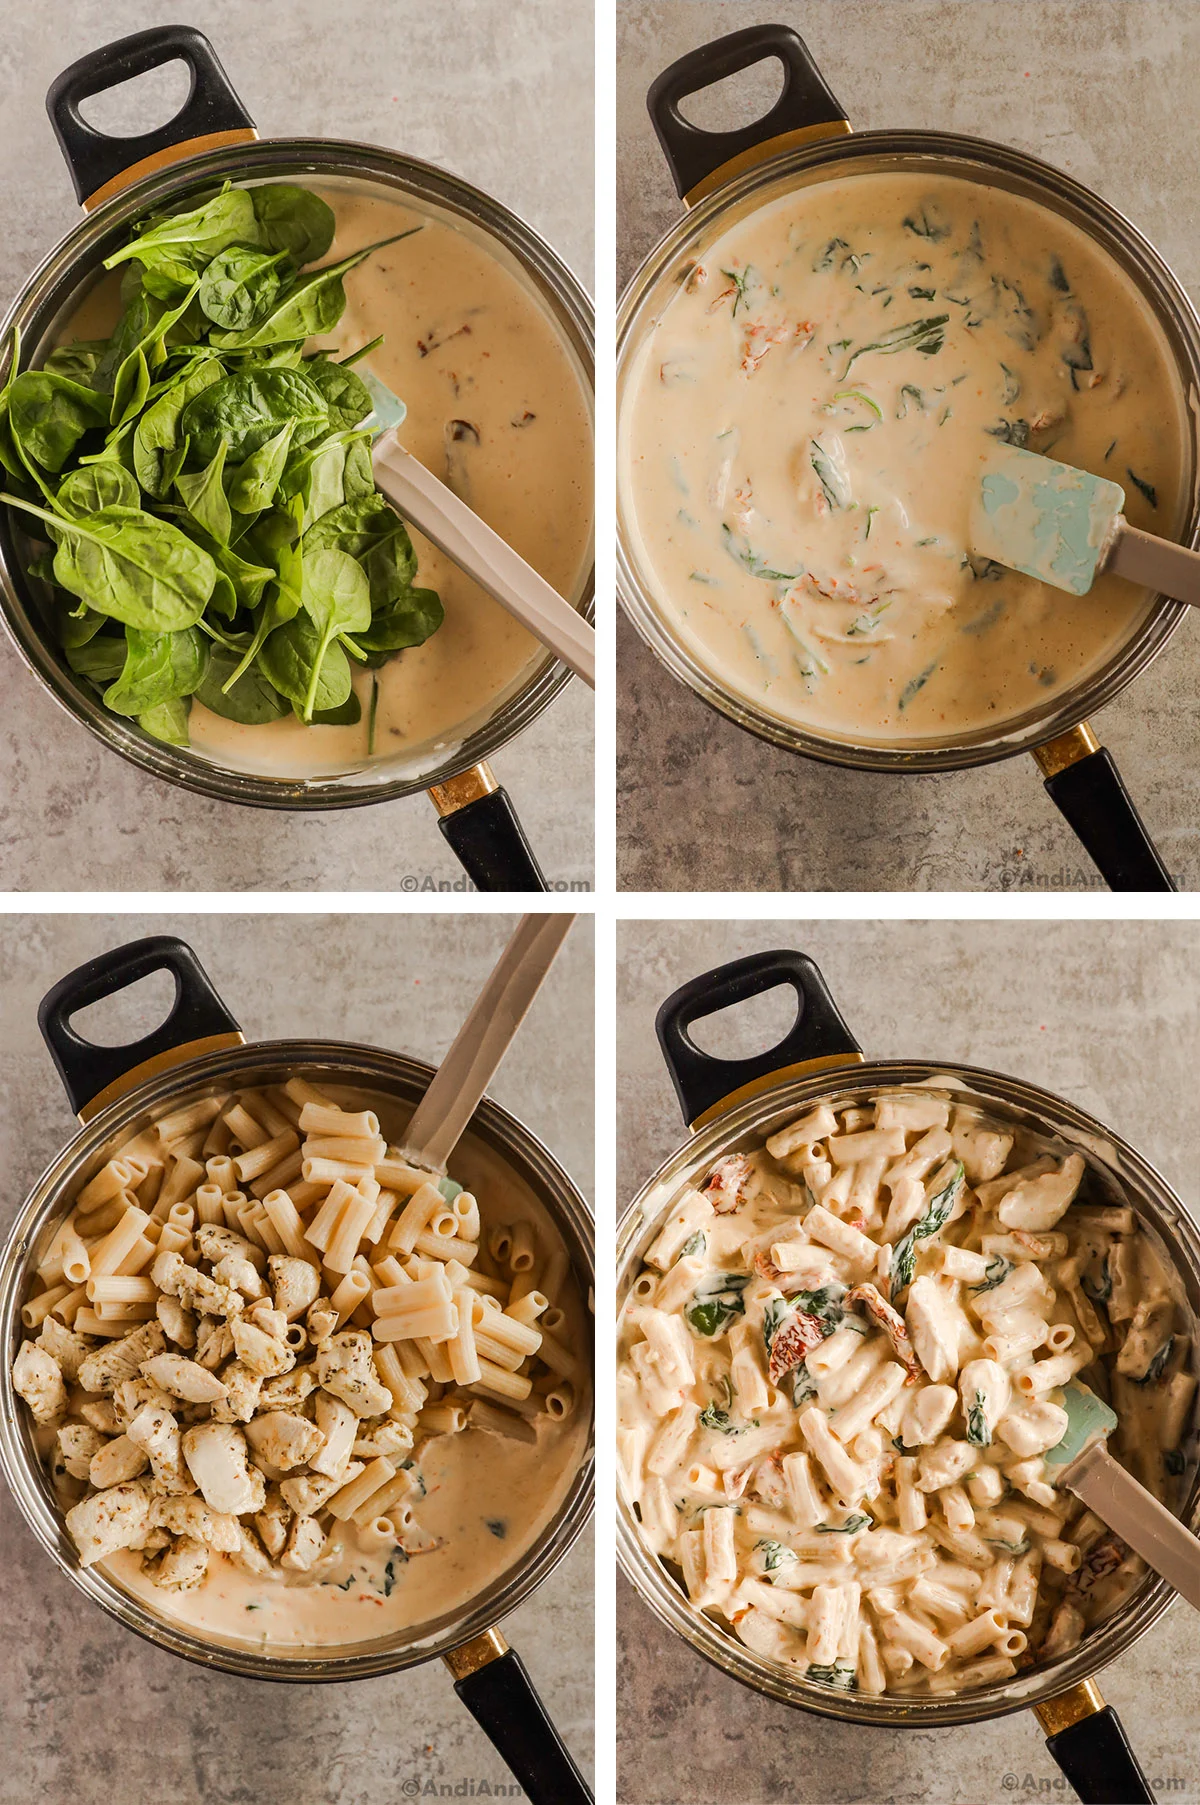 Four images of a pot, first with spinach dumped over creamy sauce. Second with creamy sauce and wilted spinach, third with pasta and chopped chicken over creamy sauce, fourth with all ingredients mixed together.